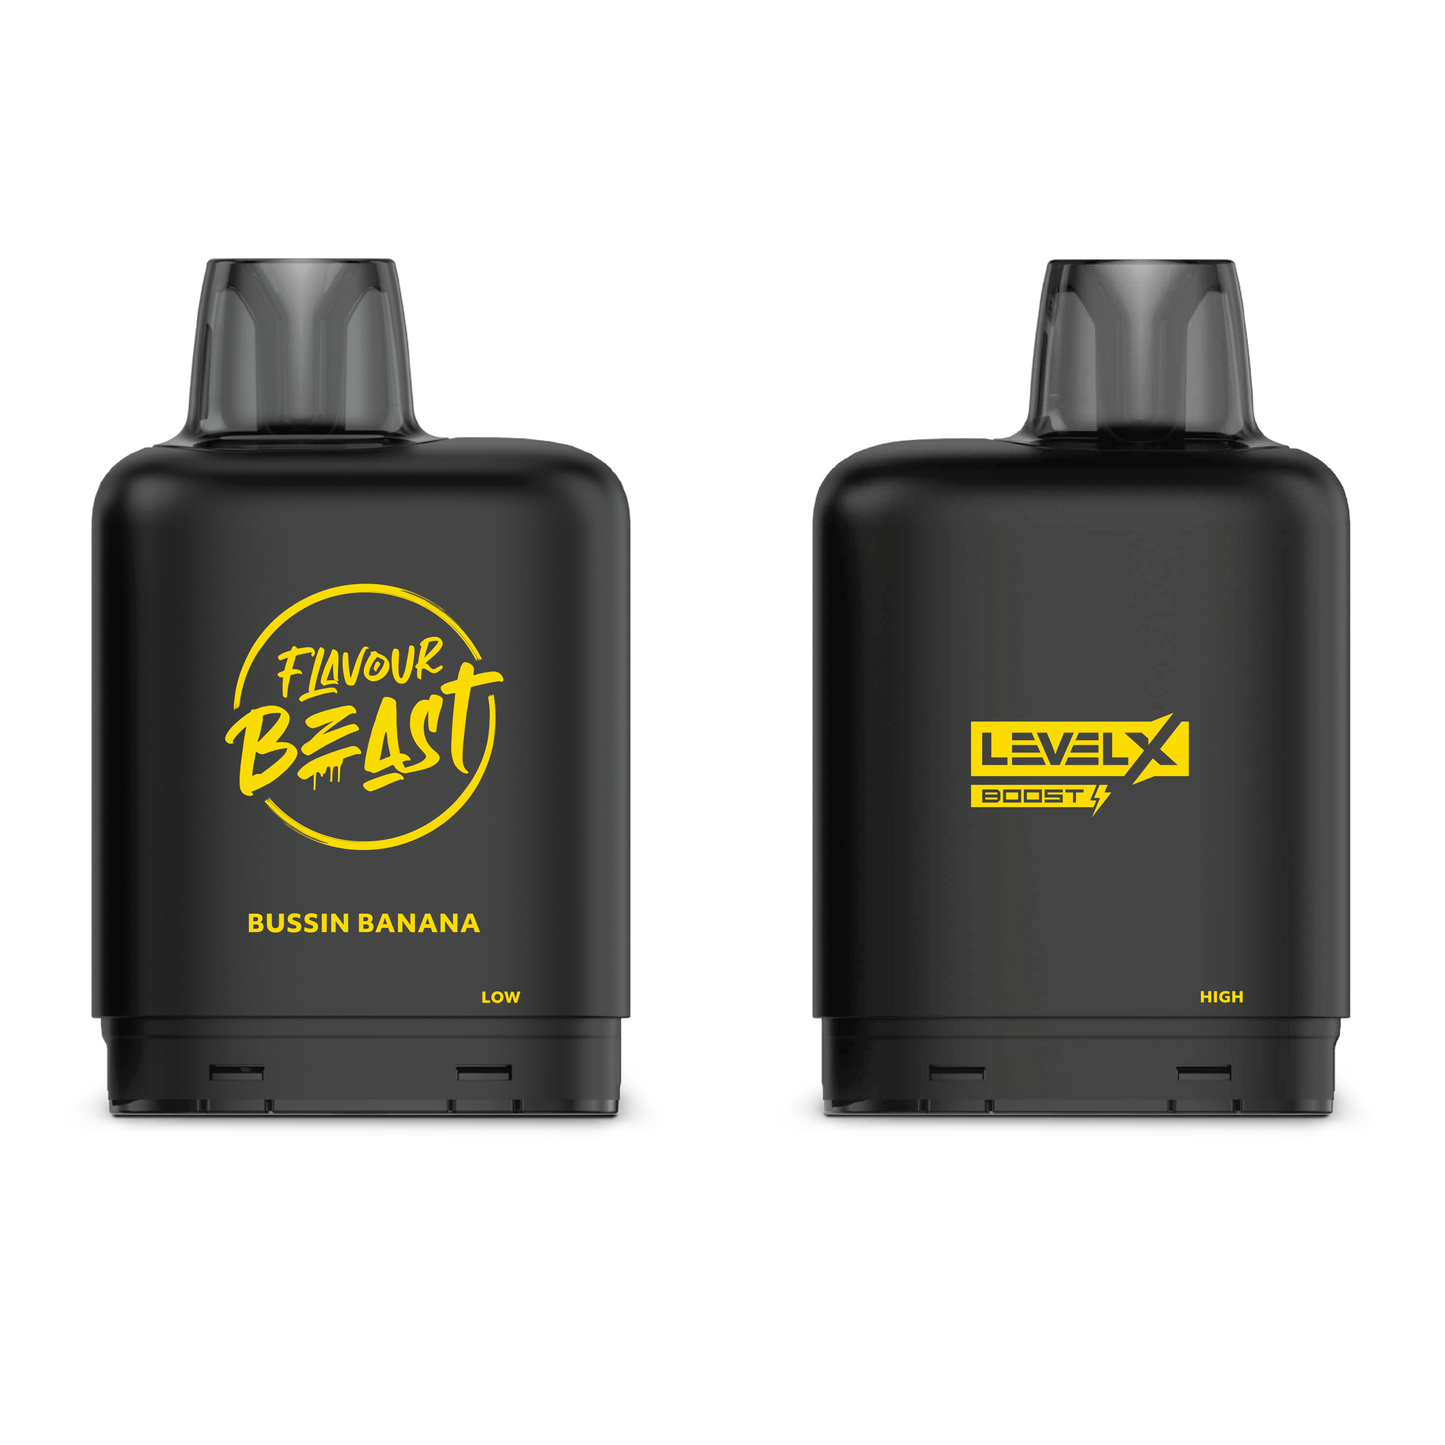 Level X Boost Pod - Flavour Beast - Bussin Banana Iced